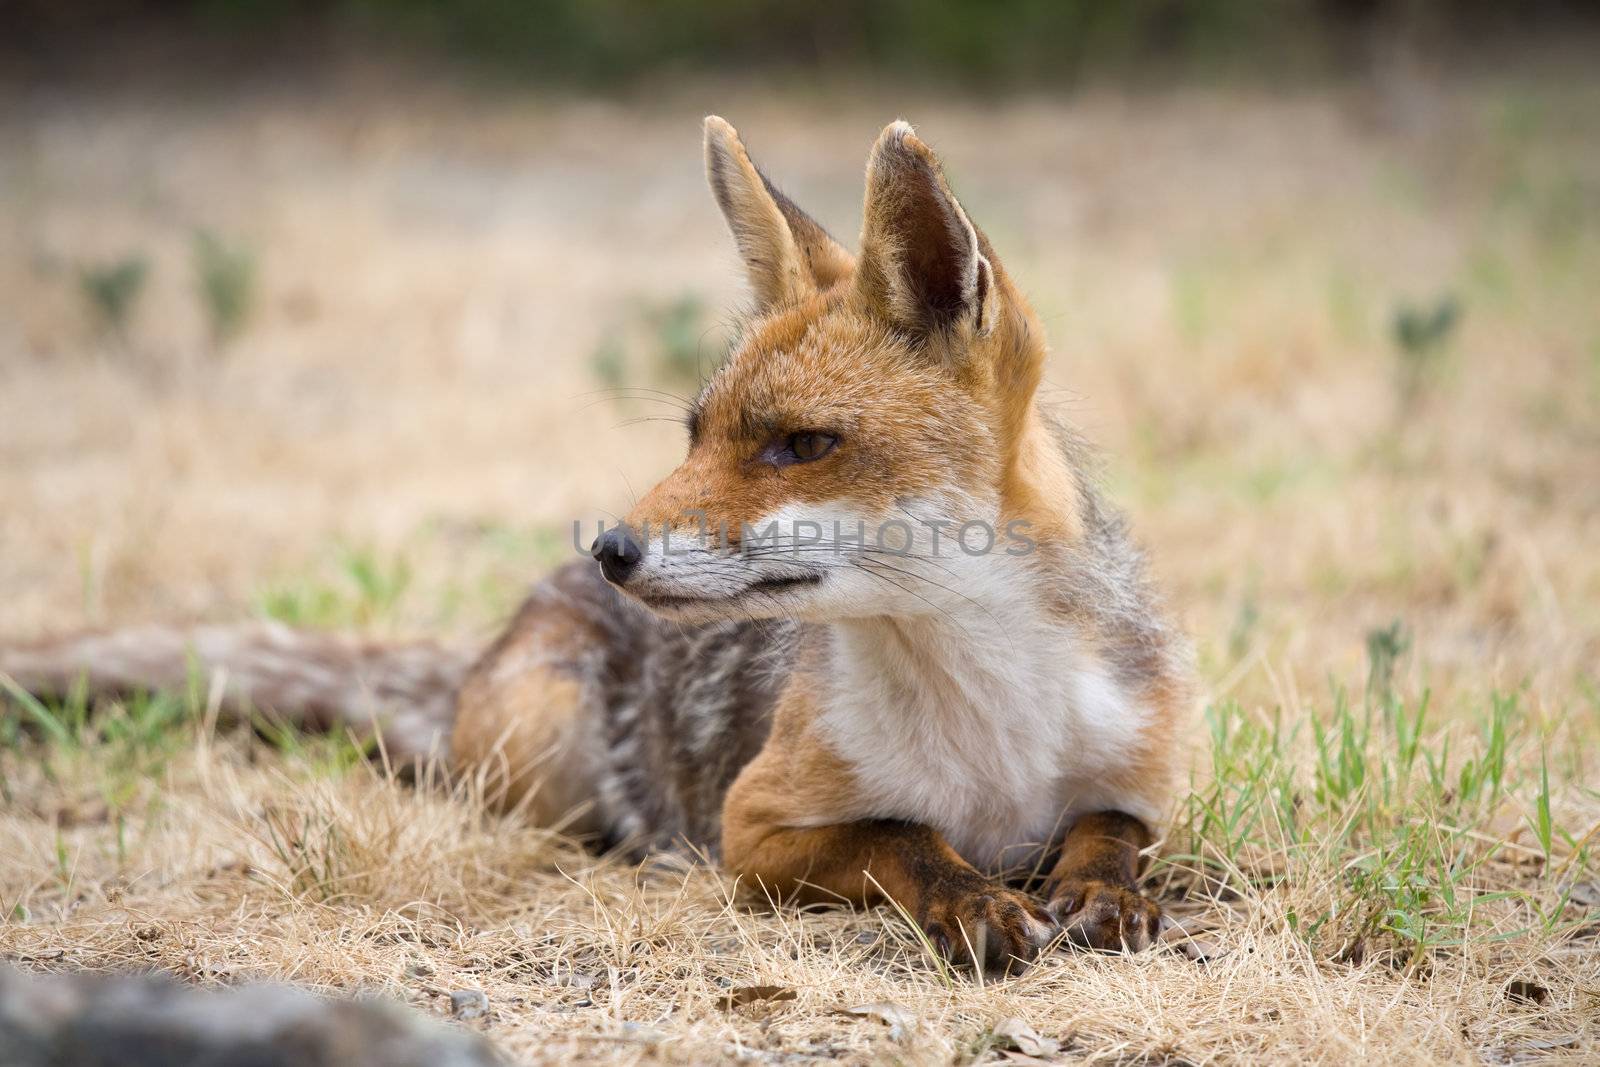 Red fox in its natural habitat